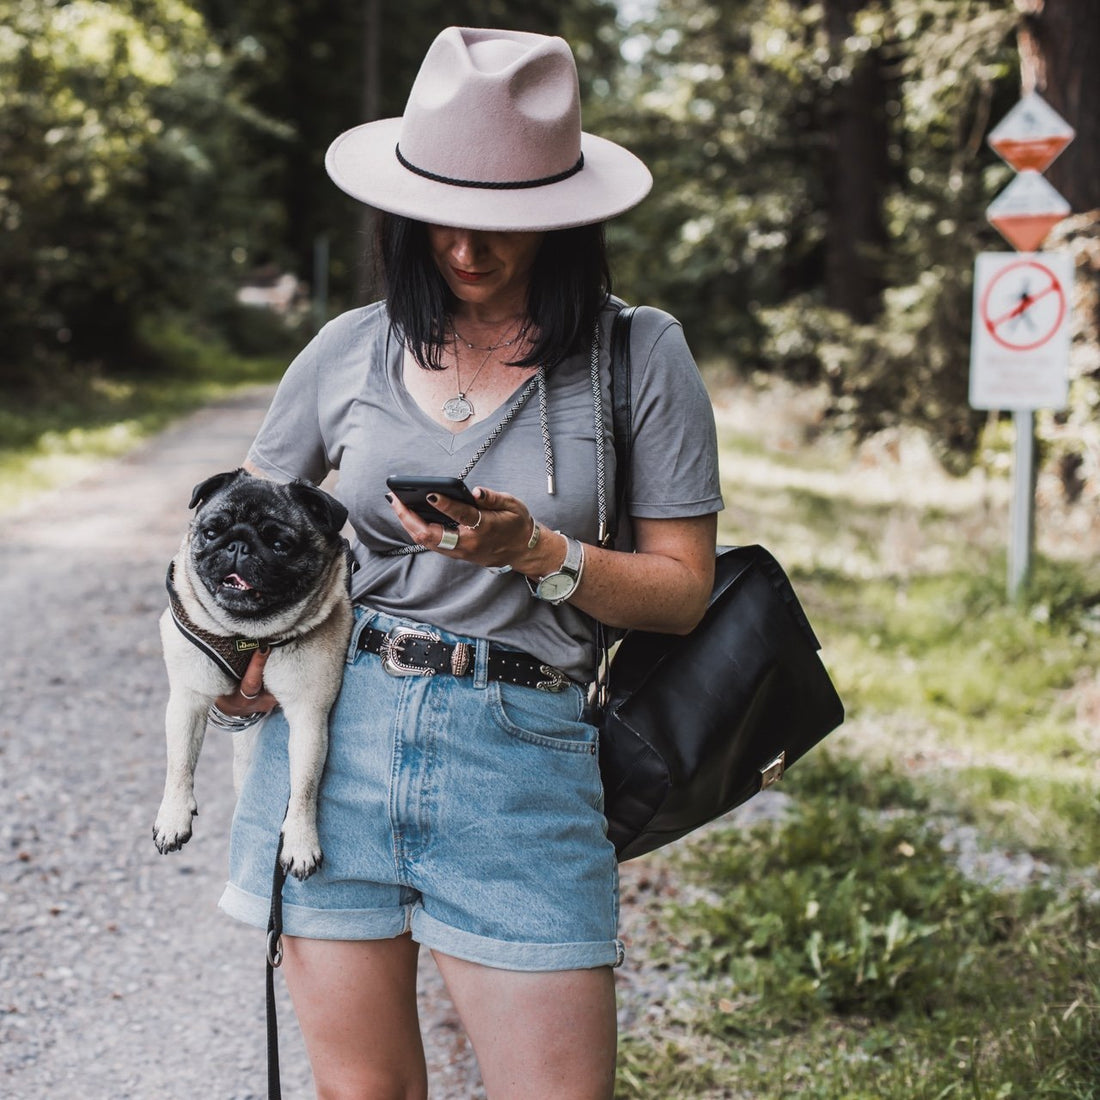 MOBILE PHONE ON A LEASH: SO YOU HAVE YOUR HANDS FREE WITH ARTWIZZ